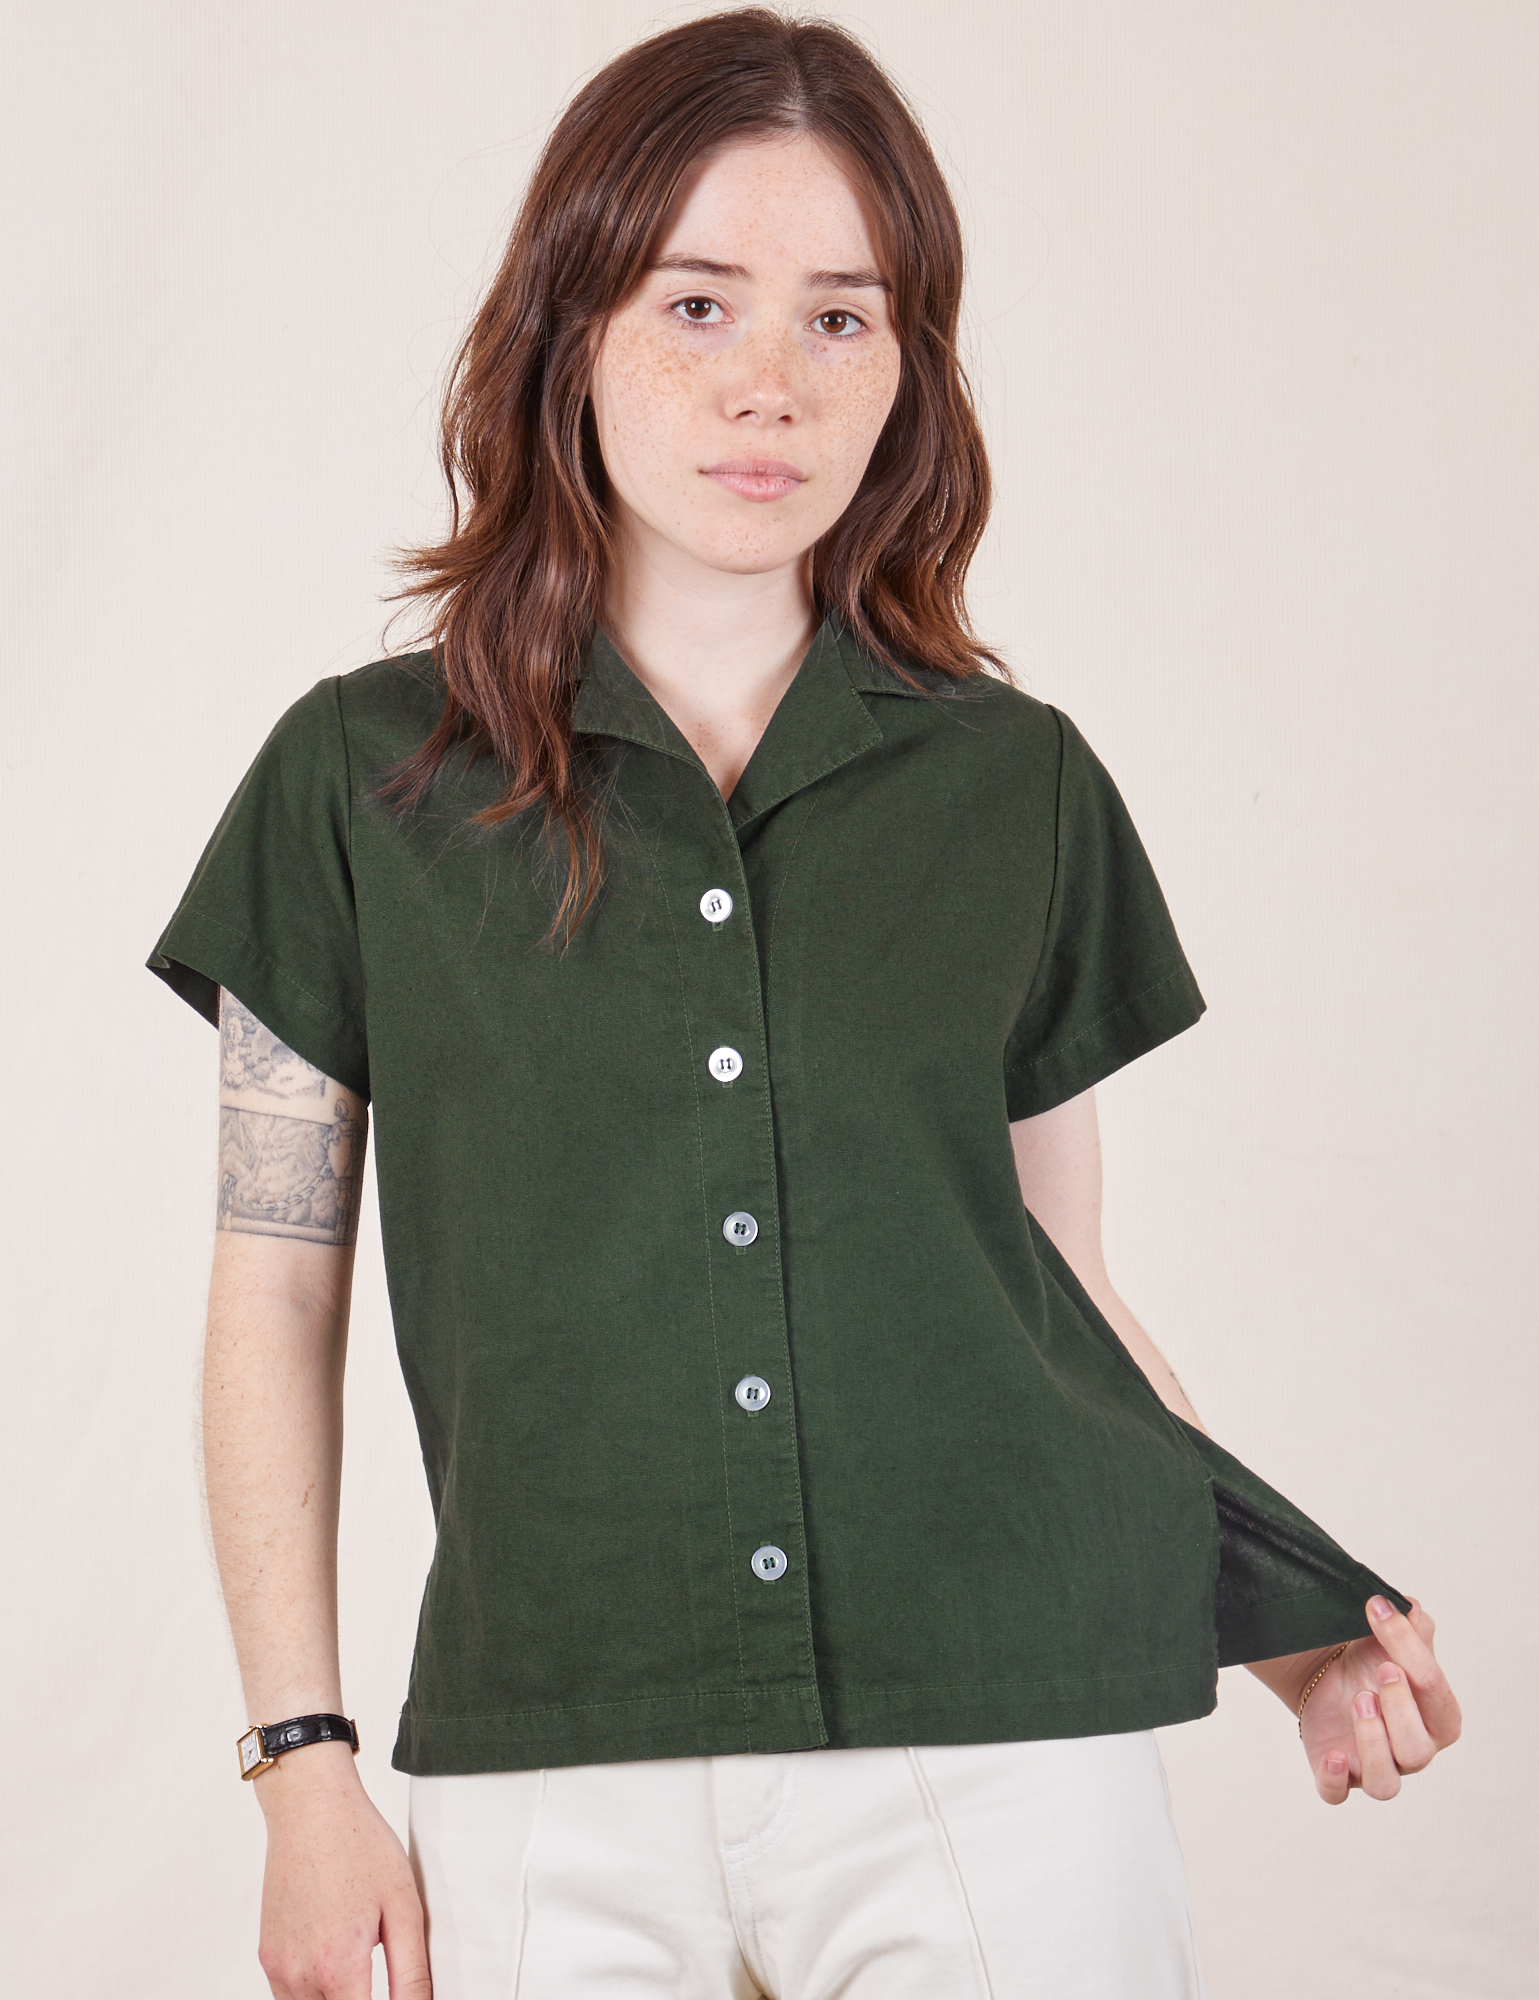 Hana is wearing Pantry Button-Up in Swamp Green